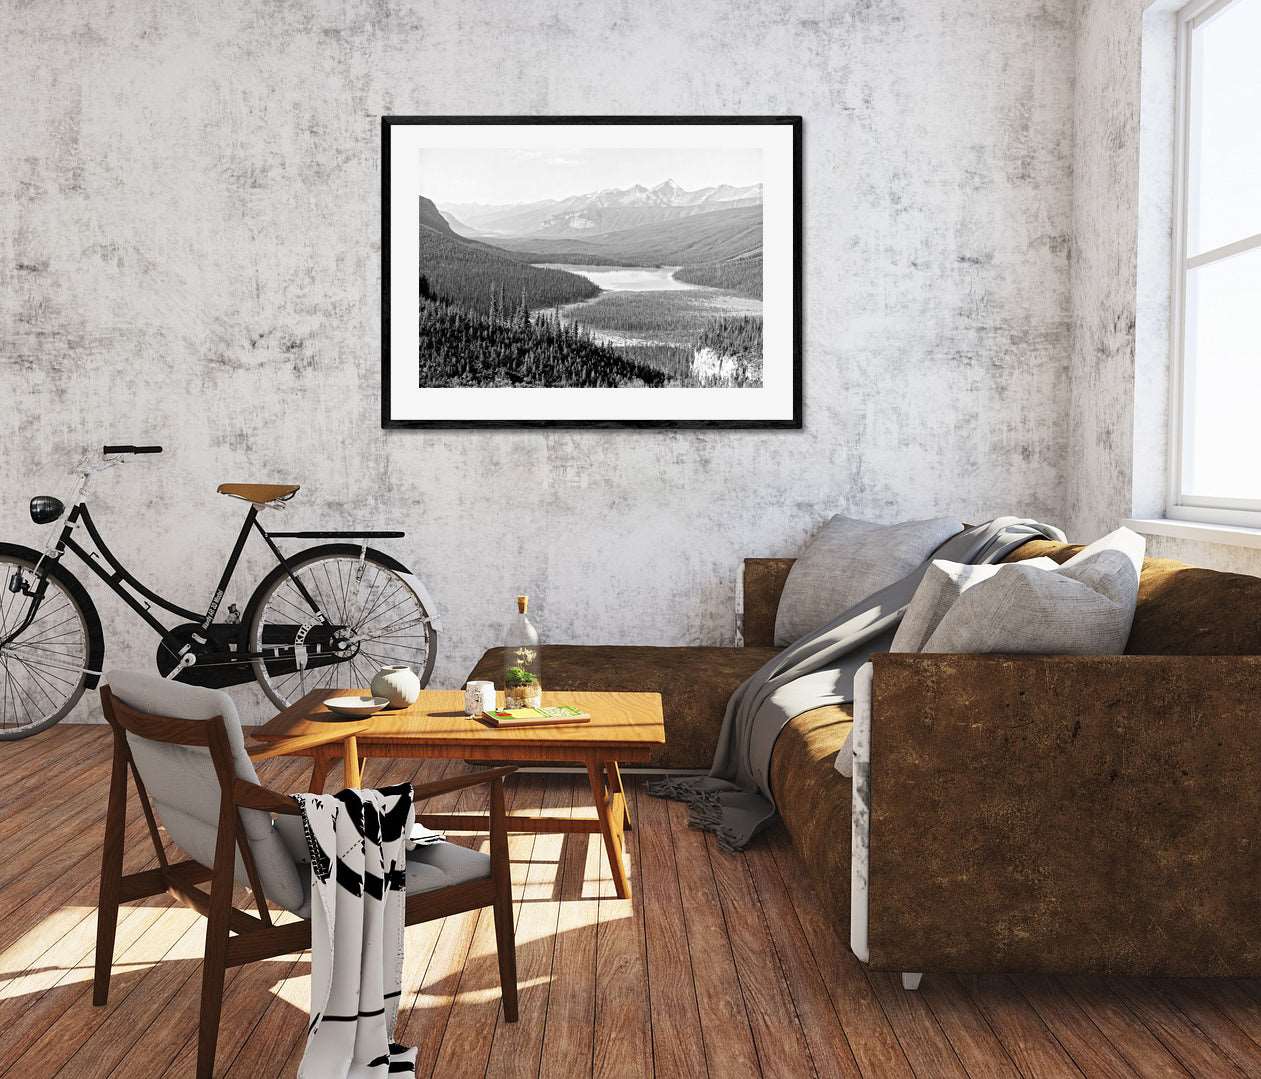 A trendy living room rendering with a framed paper print of our vintage photograph of the Van Horn Range